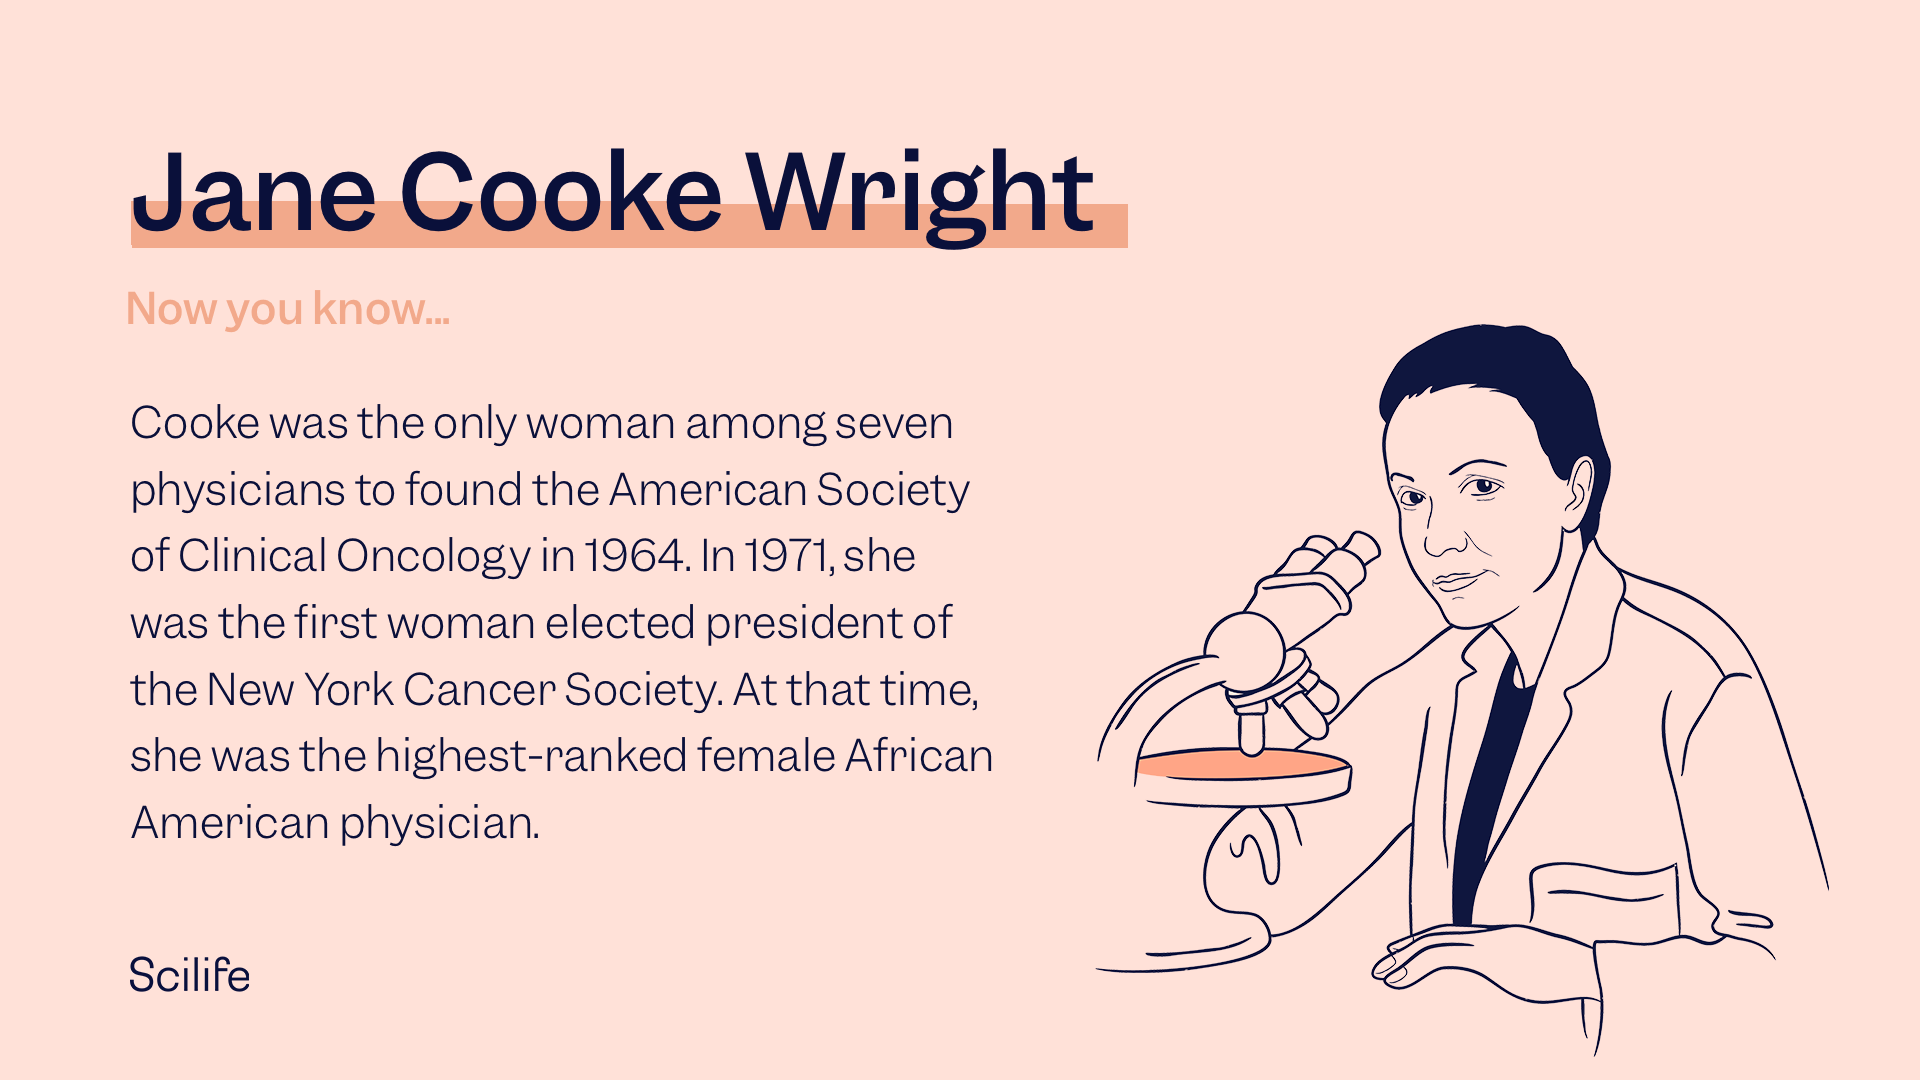 Illustration of Jane Cooke Wright with the text: Cooke was the only woman among seven physicians to found the American Society of Clinical Oncology in 1964. In 1971, she was the first woman elected president of the New York Cancer Society. At that time, she was the highest-ranked female African American physician.